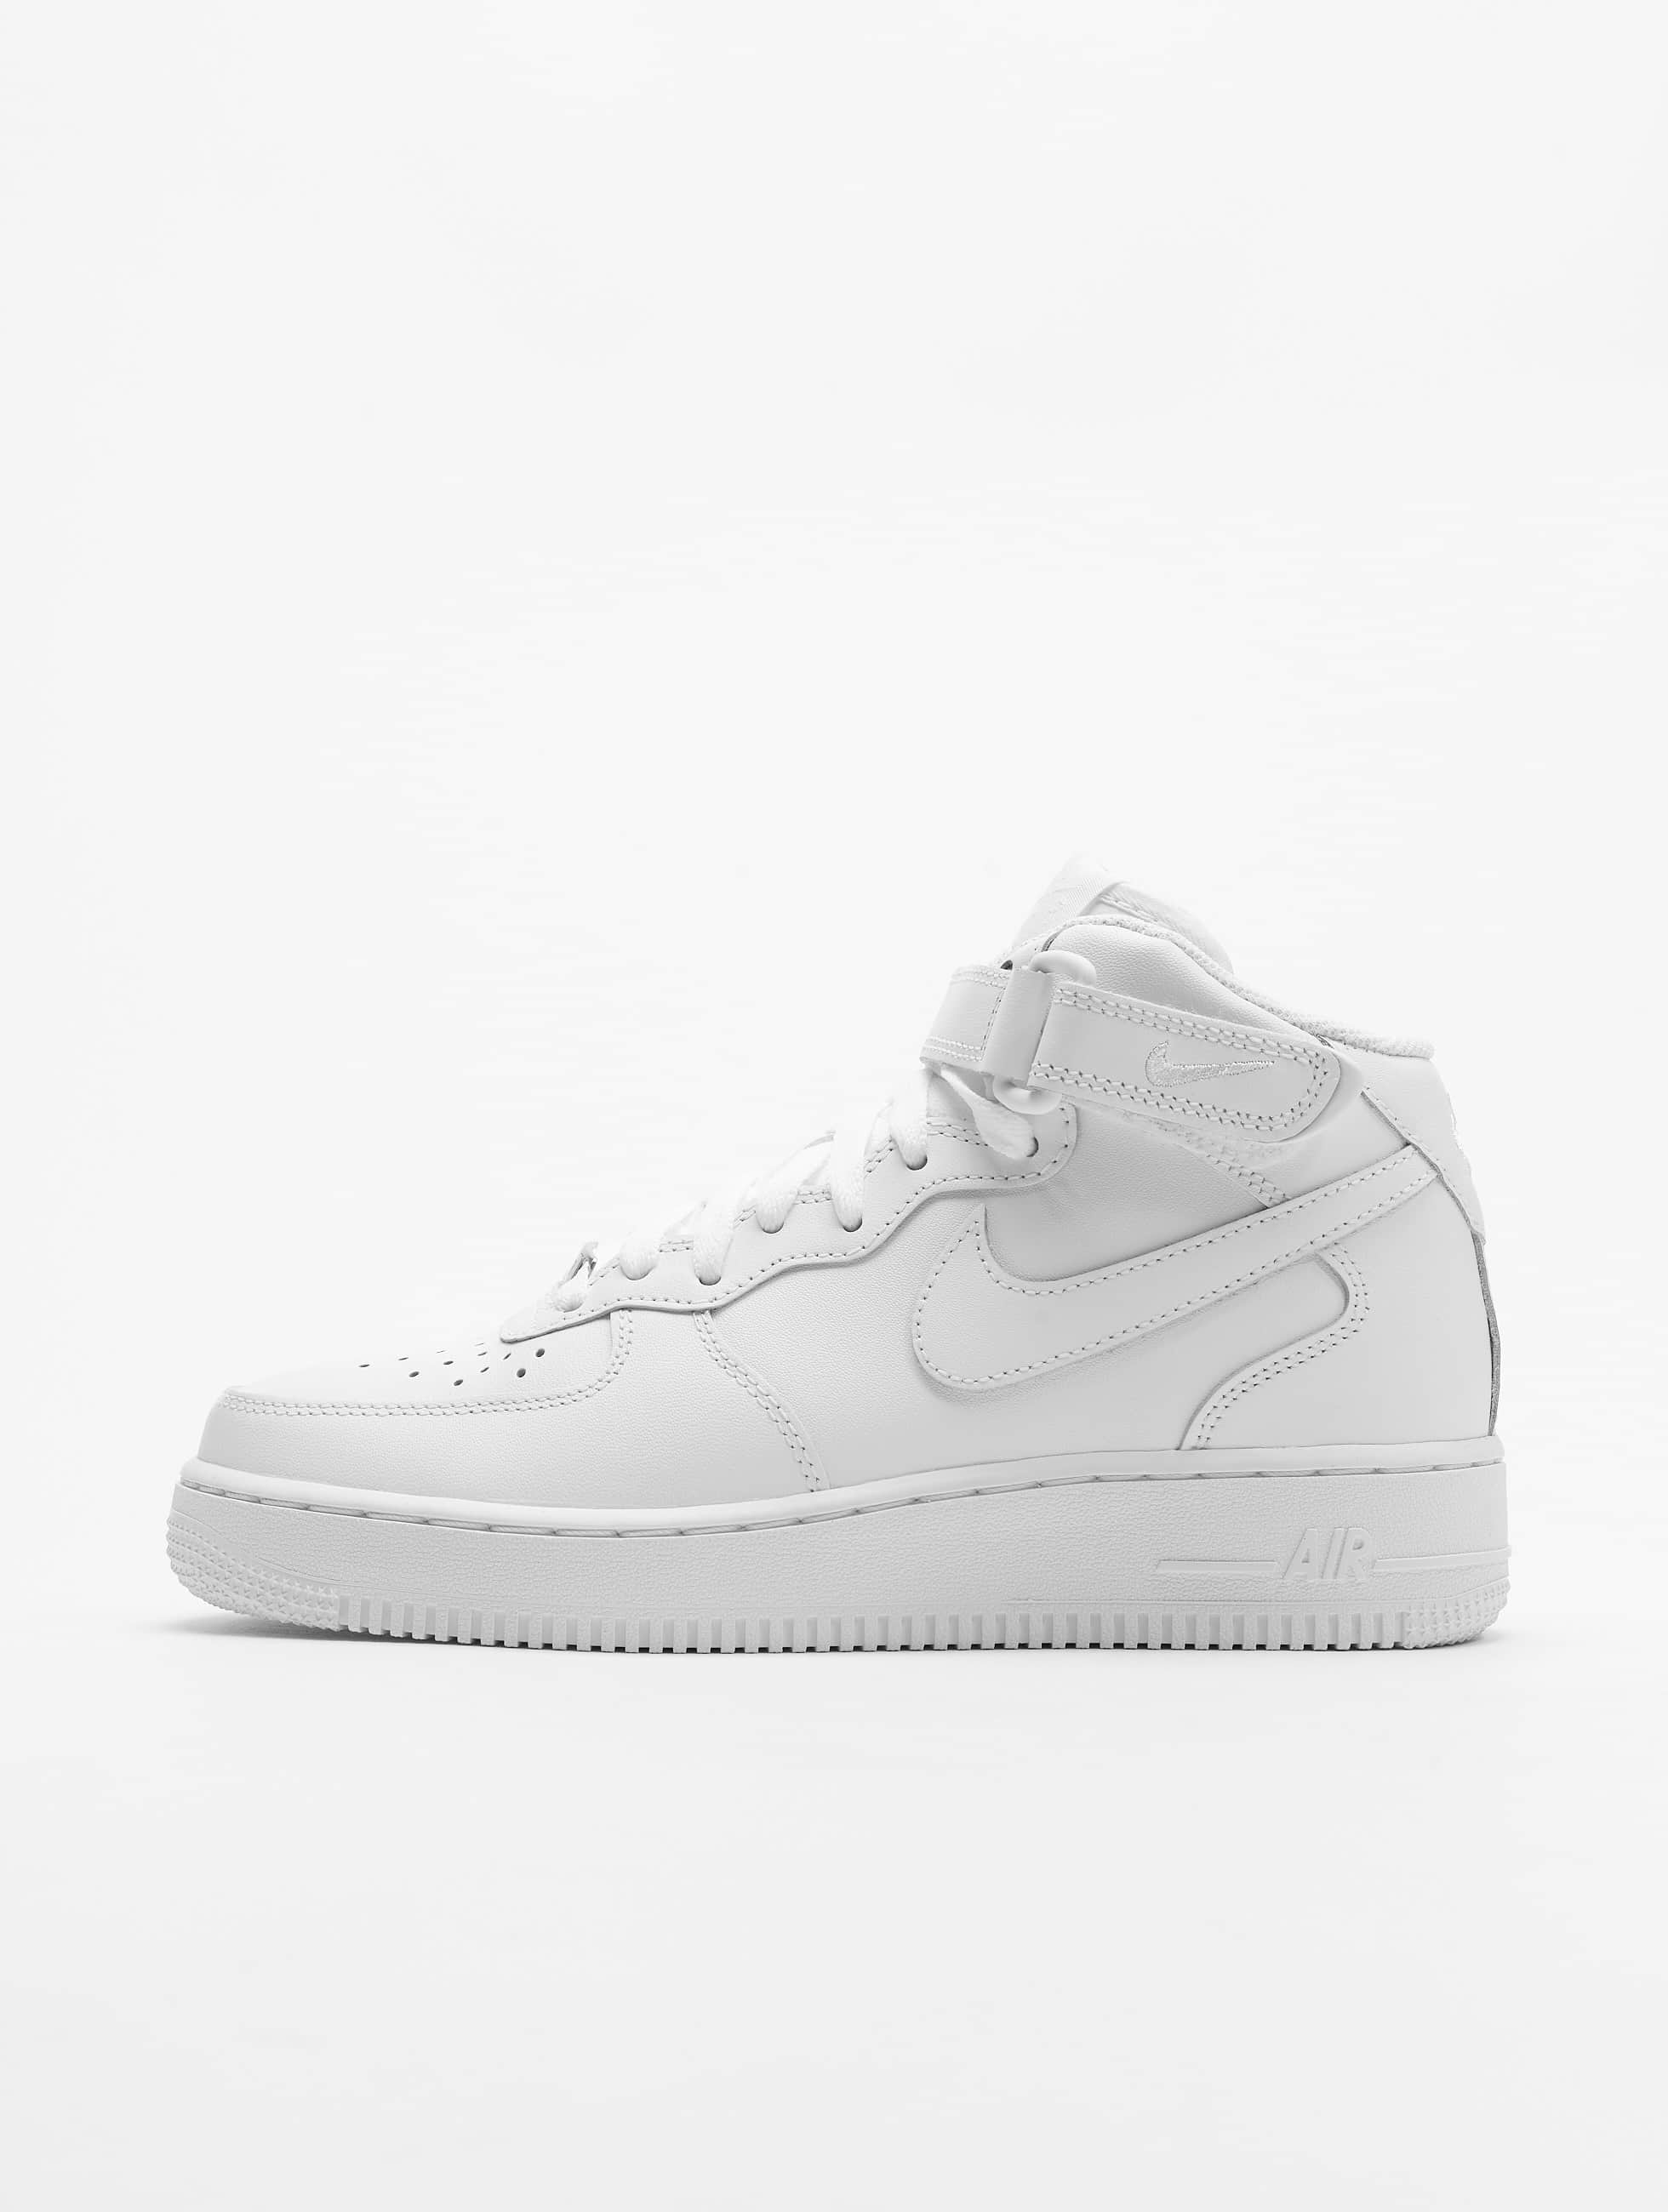 Nike Chaussures / Baskets Air Force 1 Mid '07 Basketball Shoes en blanc